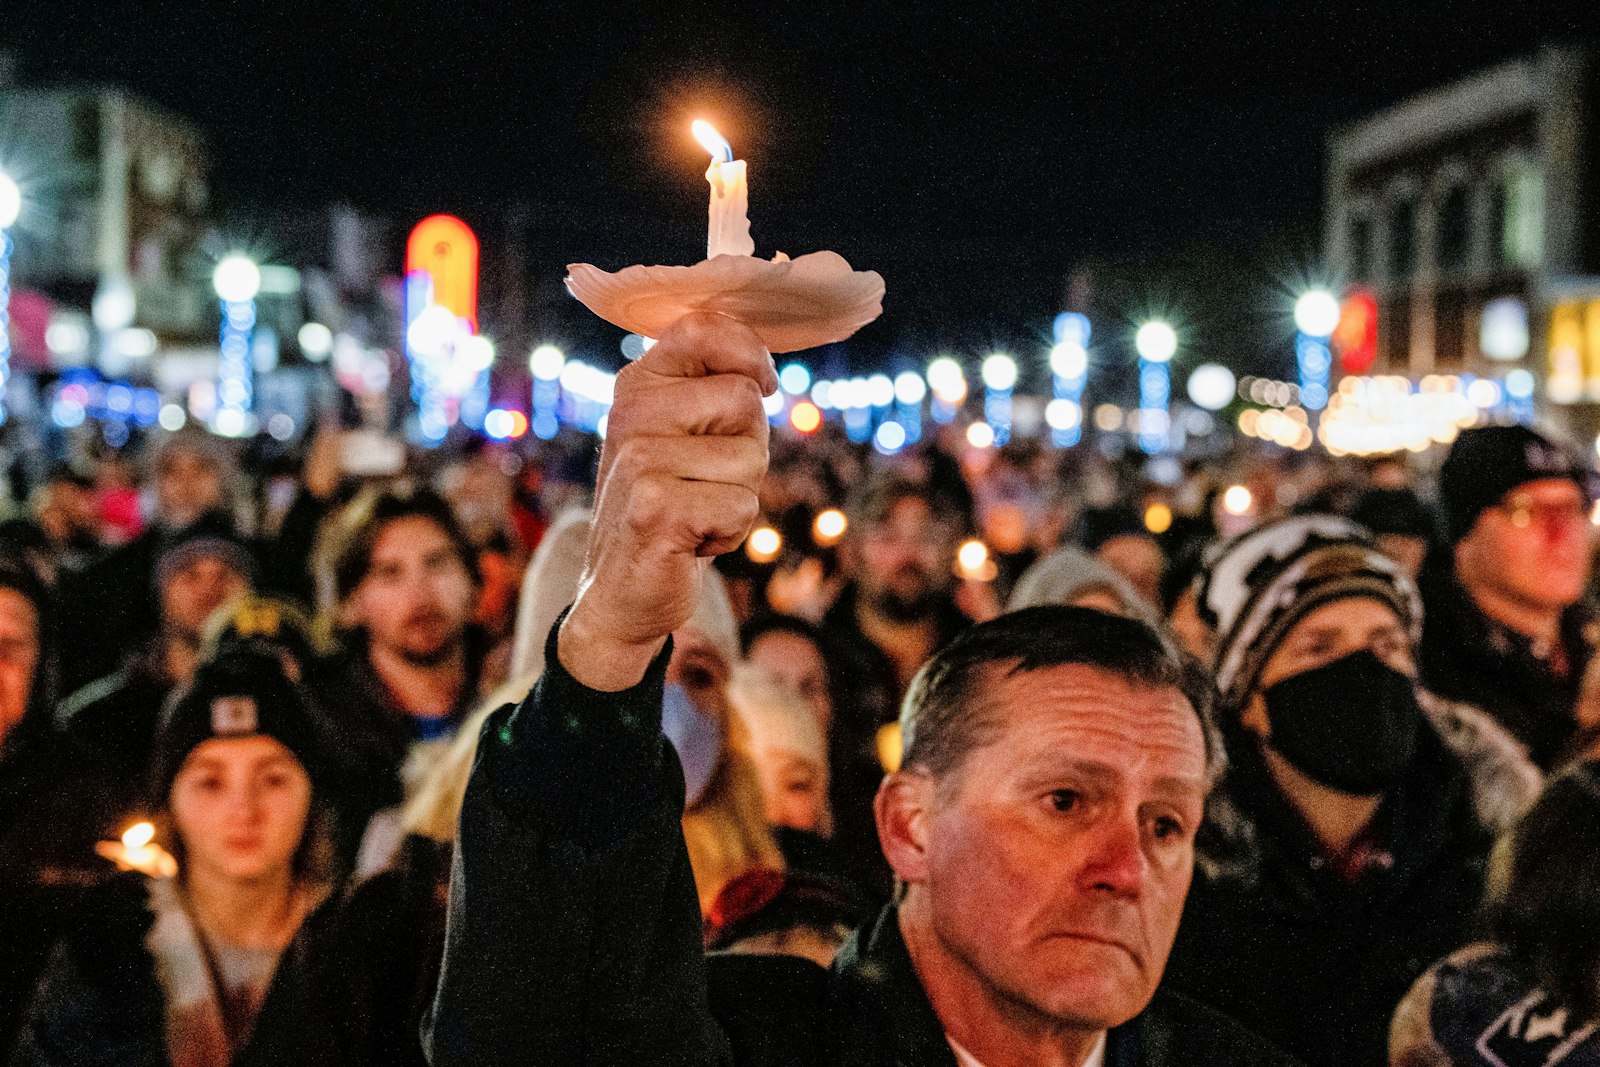 People in Oxford, Mich., gather for a vigil Dec. 3, 2021, to remember the students killed in a mass shooting at Oxford High School. (CNS photo/Seth Herald, Reuters)